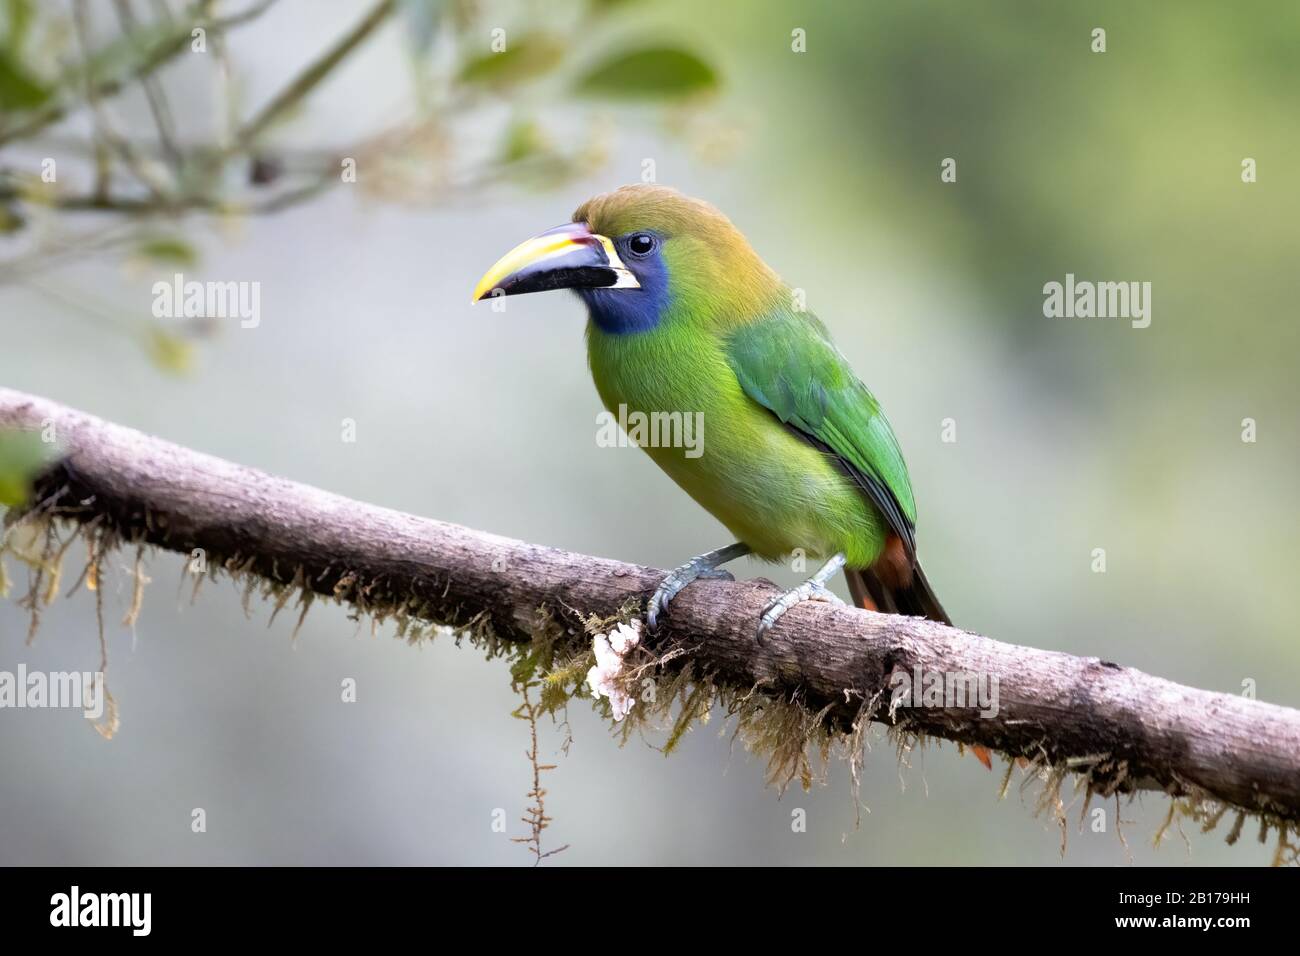 A Blue-throated toucanet (Aulacorhynchus caeruleogularis) in the Talamanca mountains of Costa Rica. This toucan nests in old woodpecker holes. Stock Photo